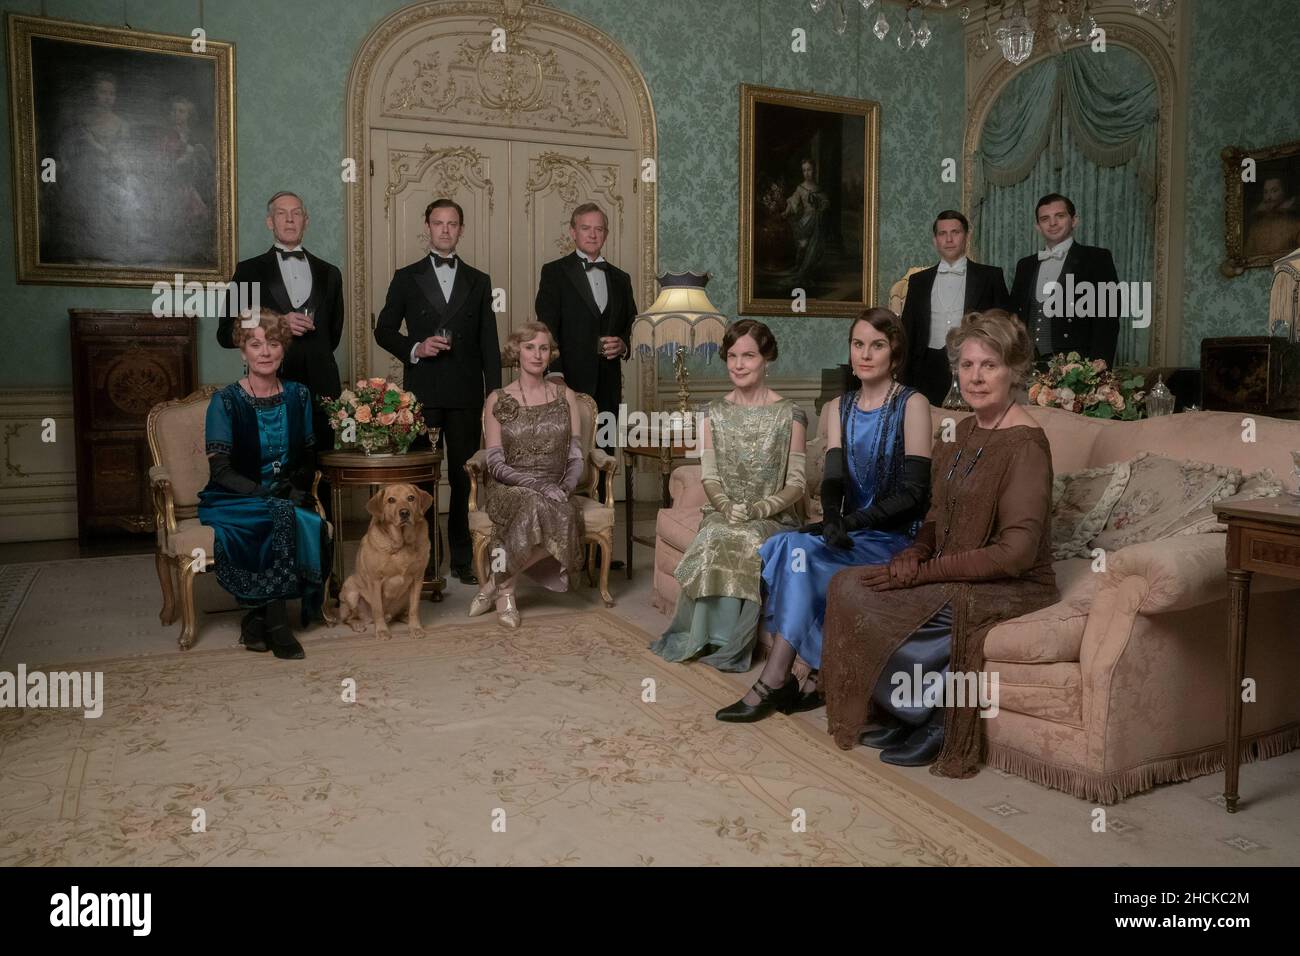 RELEASE DATE: March 18, 2022. TITLE: Downton Abbey: A New Era. STUDIO: Universal Pictures.DIRECTOR: Simon Curtis. PLOT: Follow-up to the 2019 feature film in which the Crawley family and Downton staff received a royal visit from the King and Queen of Great Britain. STARRING: (l-r.) Samantha Bond as Lady Rosamund, Douglas Reith as Lord Merton, Harry Hadden-Paton as Lord Hexham, Laura Carmichael as Lady Edith Hexham, Hugh Bonneville as Lord Grantham, Elizabeth McGovern as Lady Grantham, Michelle Dockery as Lady Mary Talbot, Penelope Wilton as Lady Merton, Robert James Collier as Thomas Barrow an Stock Photo